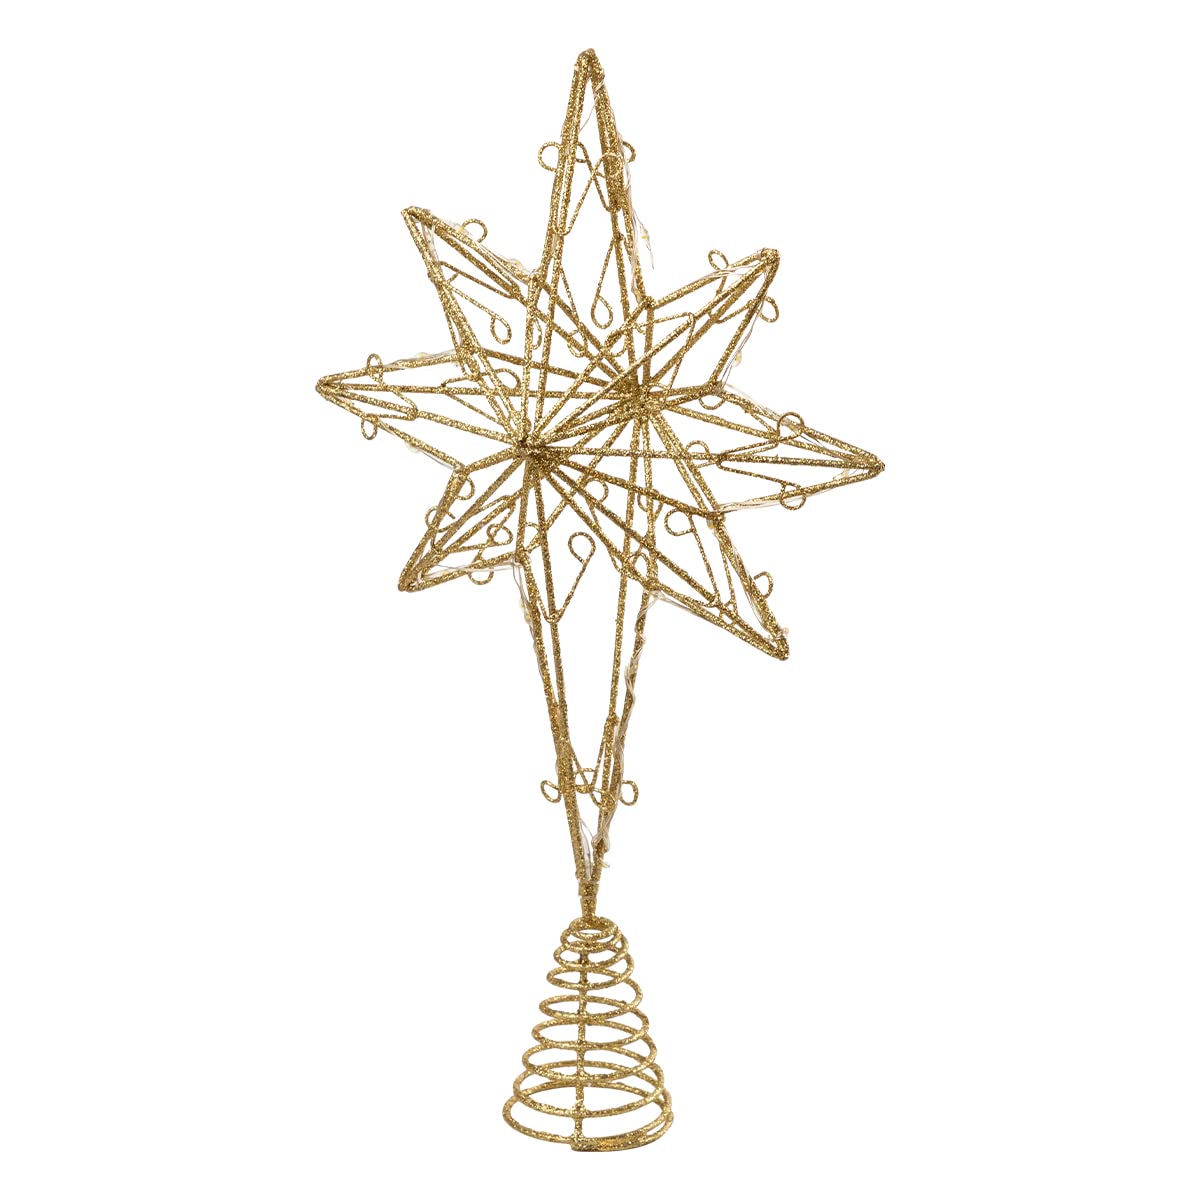 Gold Eight-point Star Tree Topper, Warm White